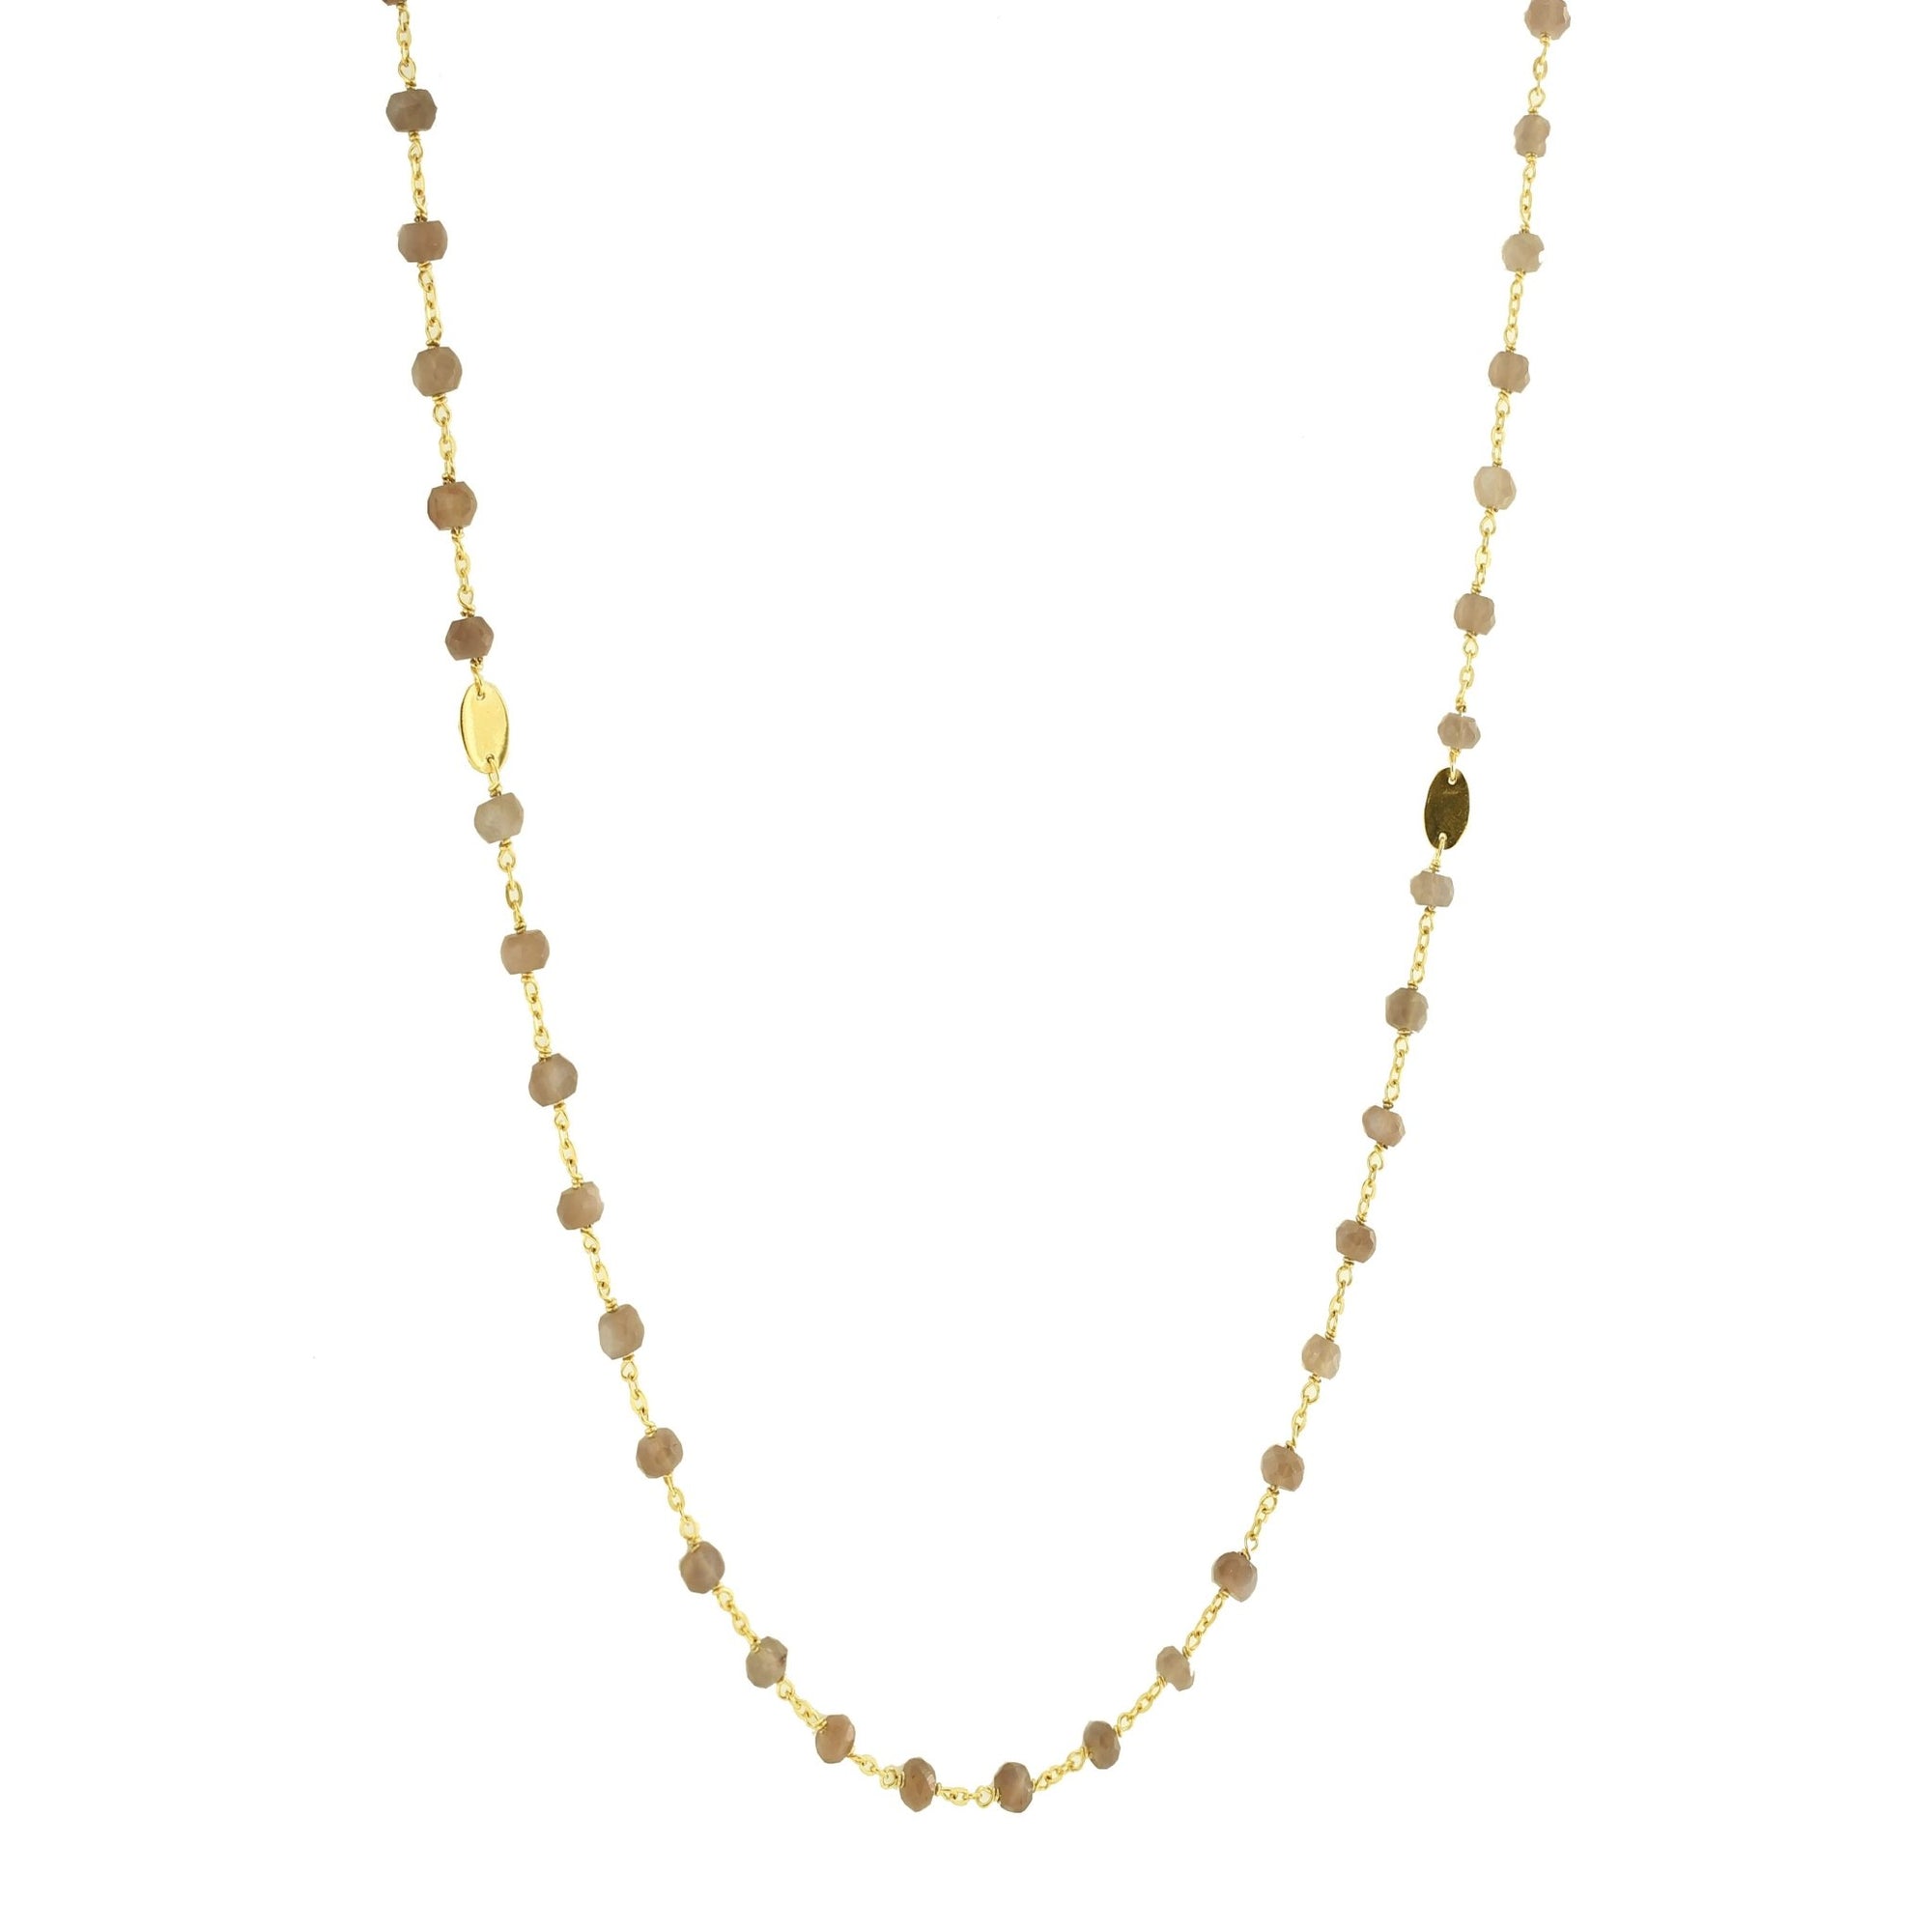 ICONIC LONG BEADED NECKLACE - CHAI MOONSTONE & GOLD 34"- LIMITED EDITION - SO PRETTY CARA COTTER